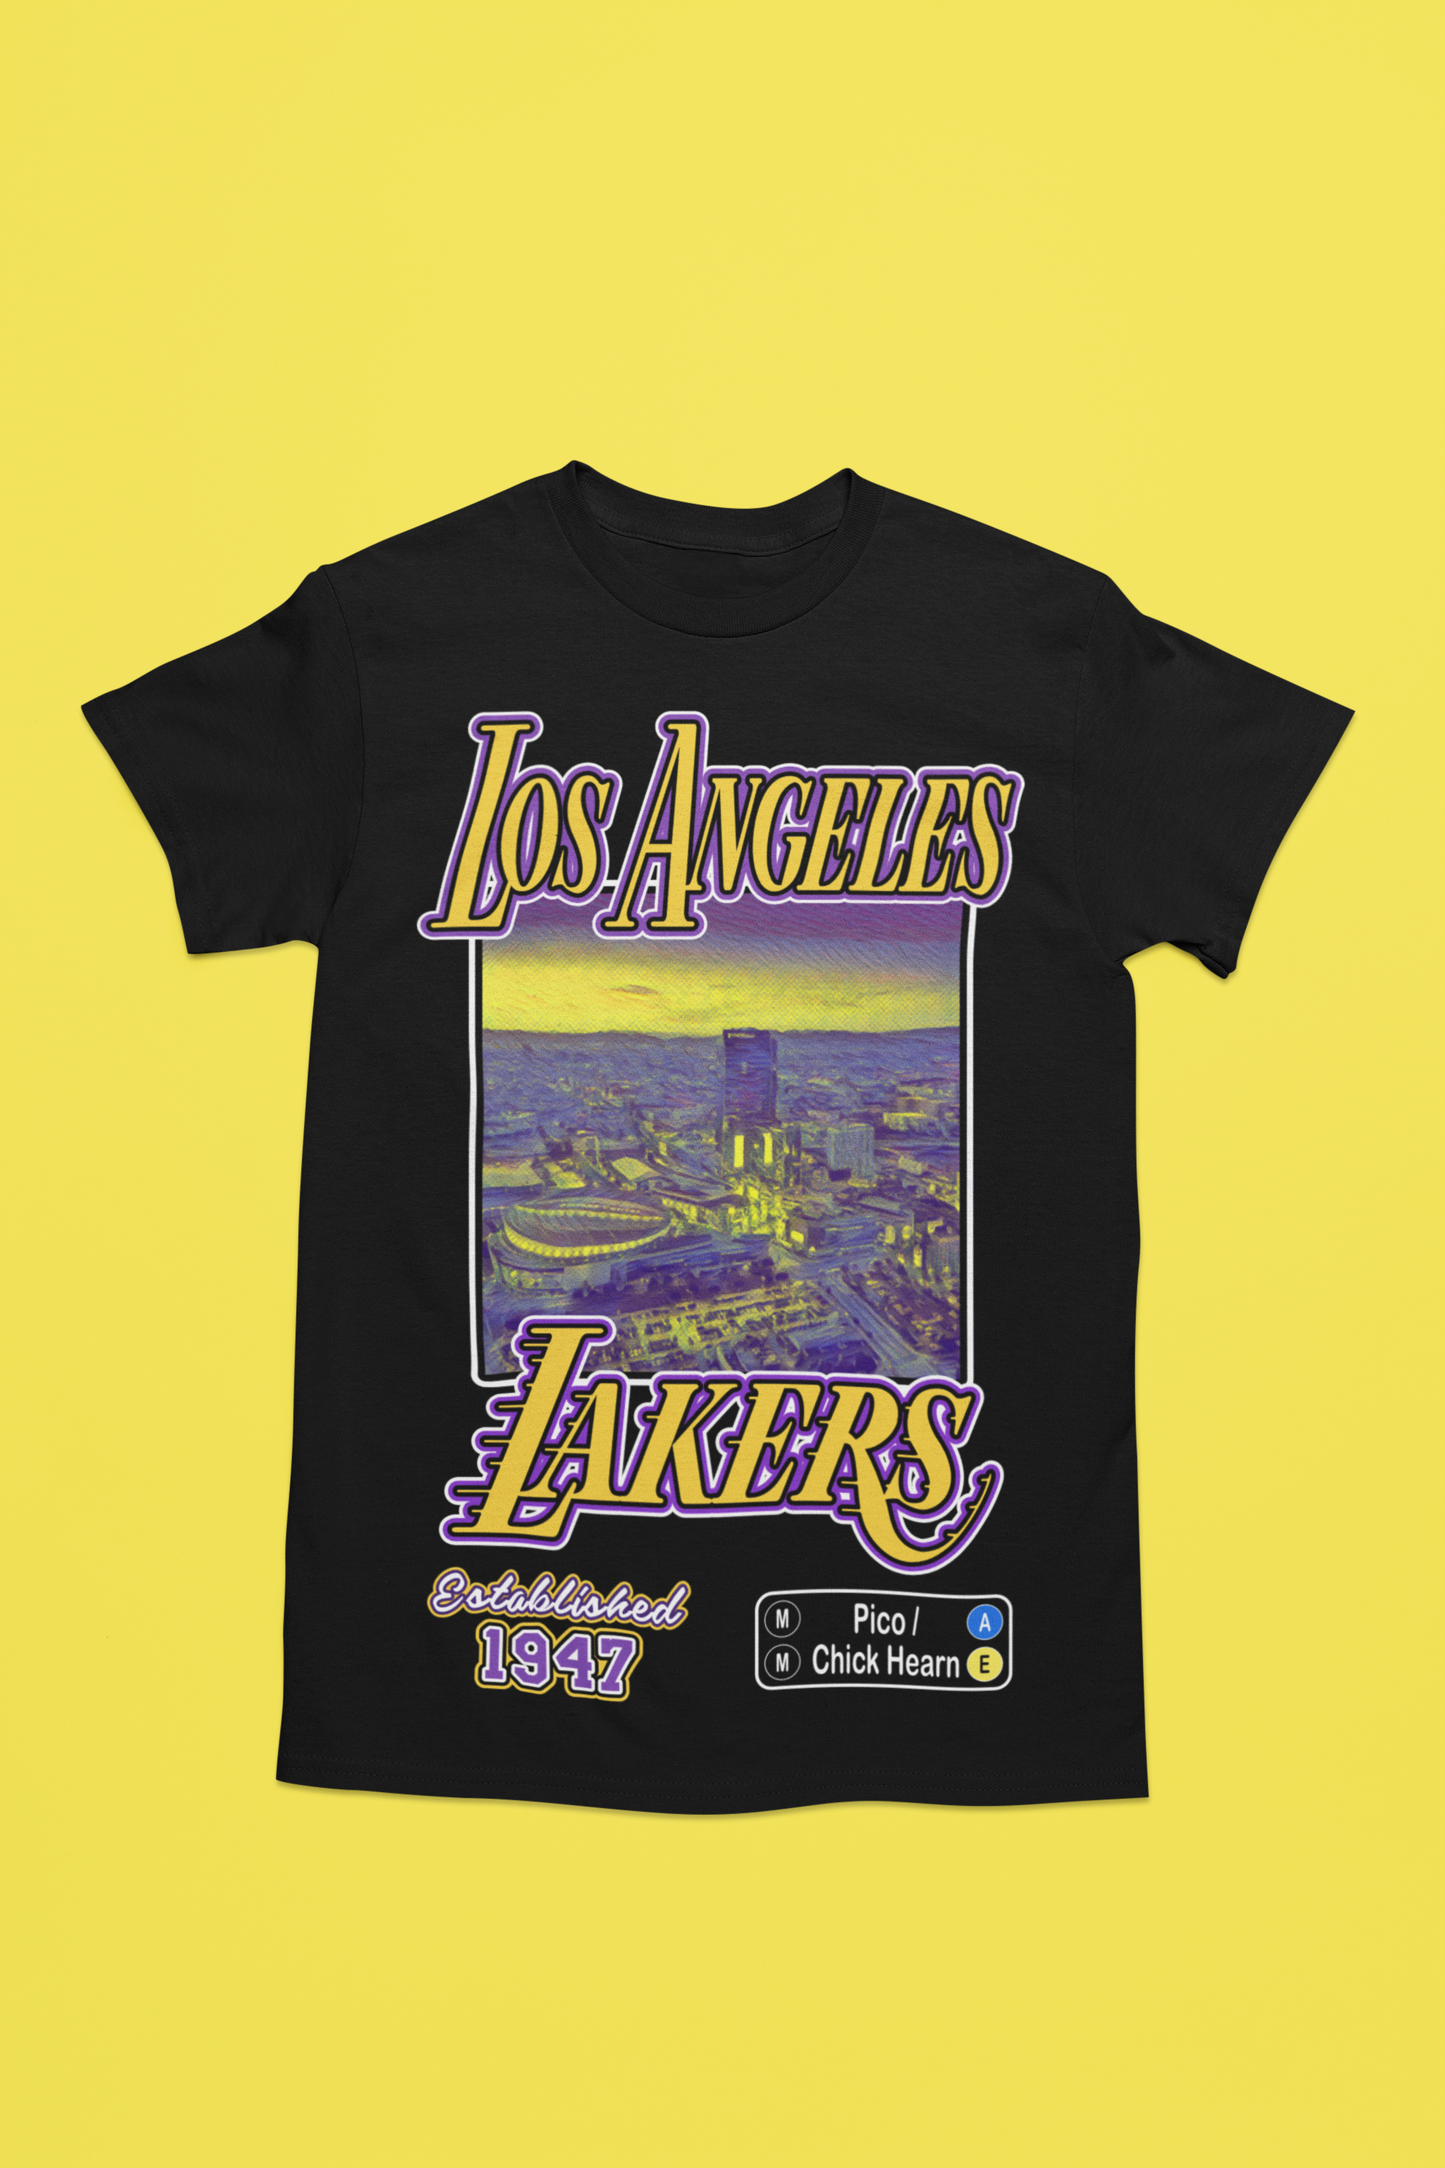 Unisex - Courtside Series (Los Angeles Lakers) Graphic T-Shirt